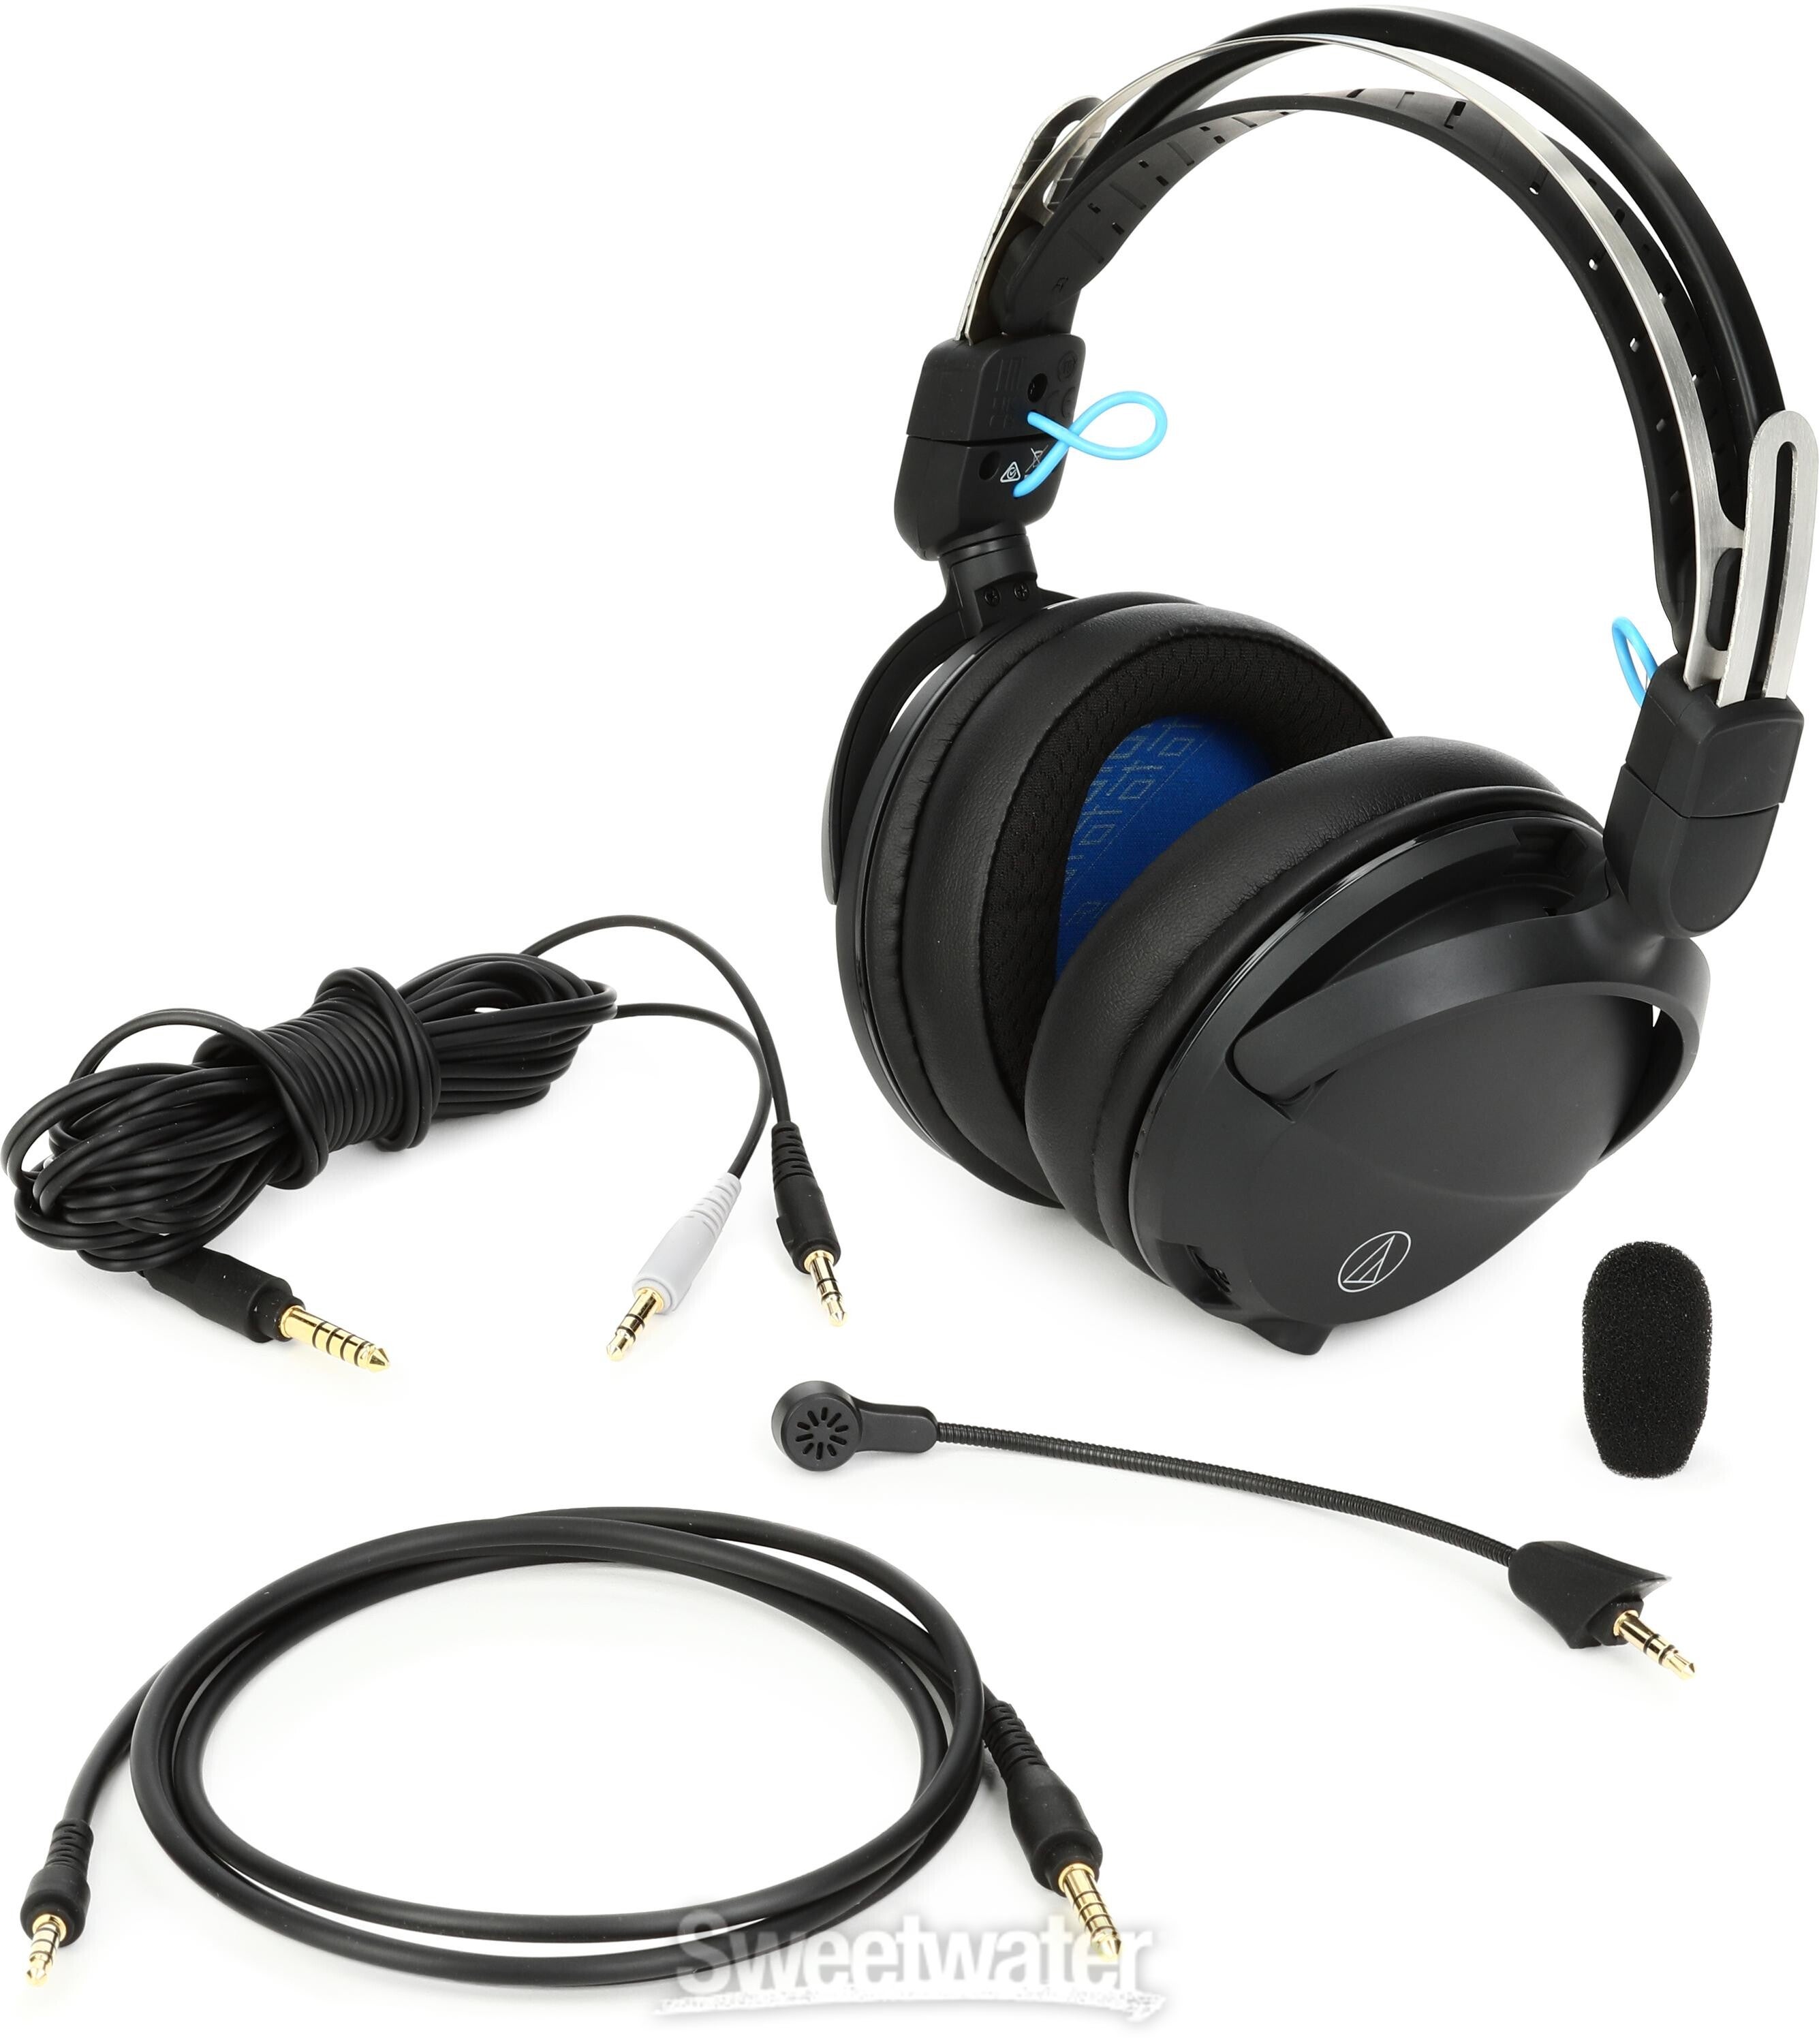 GL3BK Closed-back Gaming Headset with Mic, 3.5mm - Sweetwater